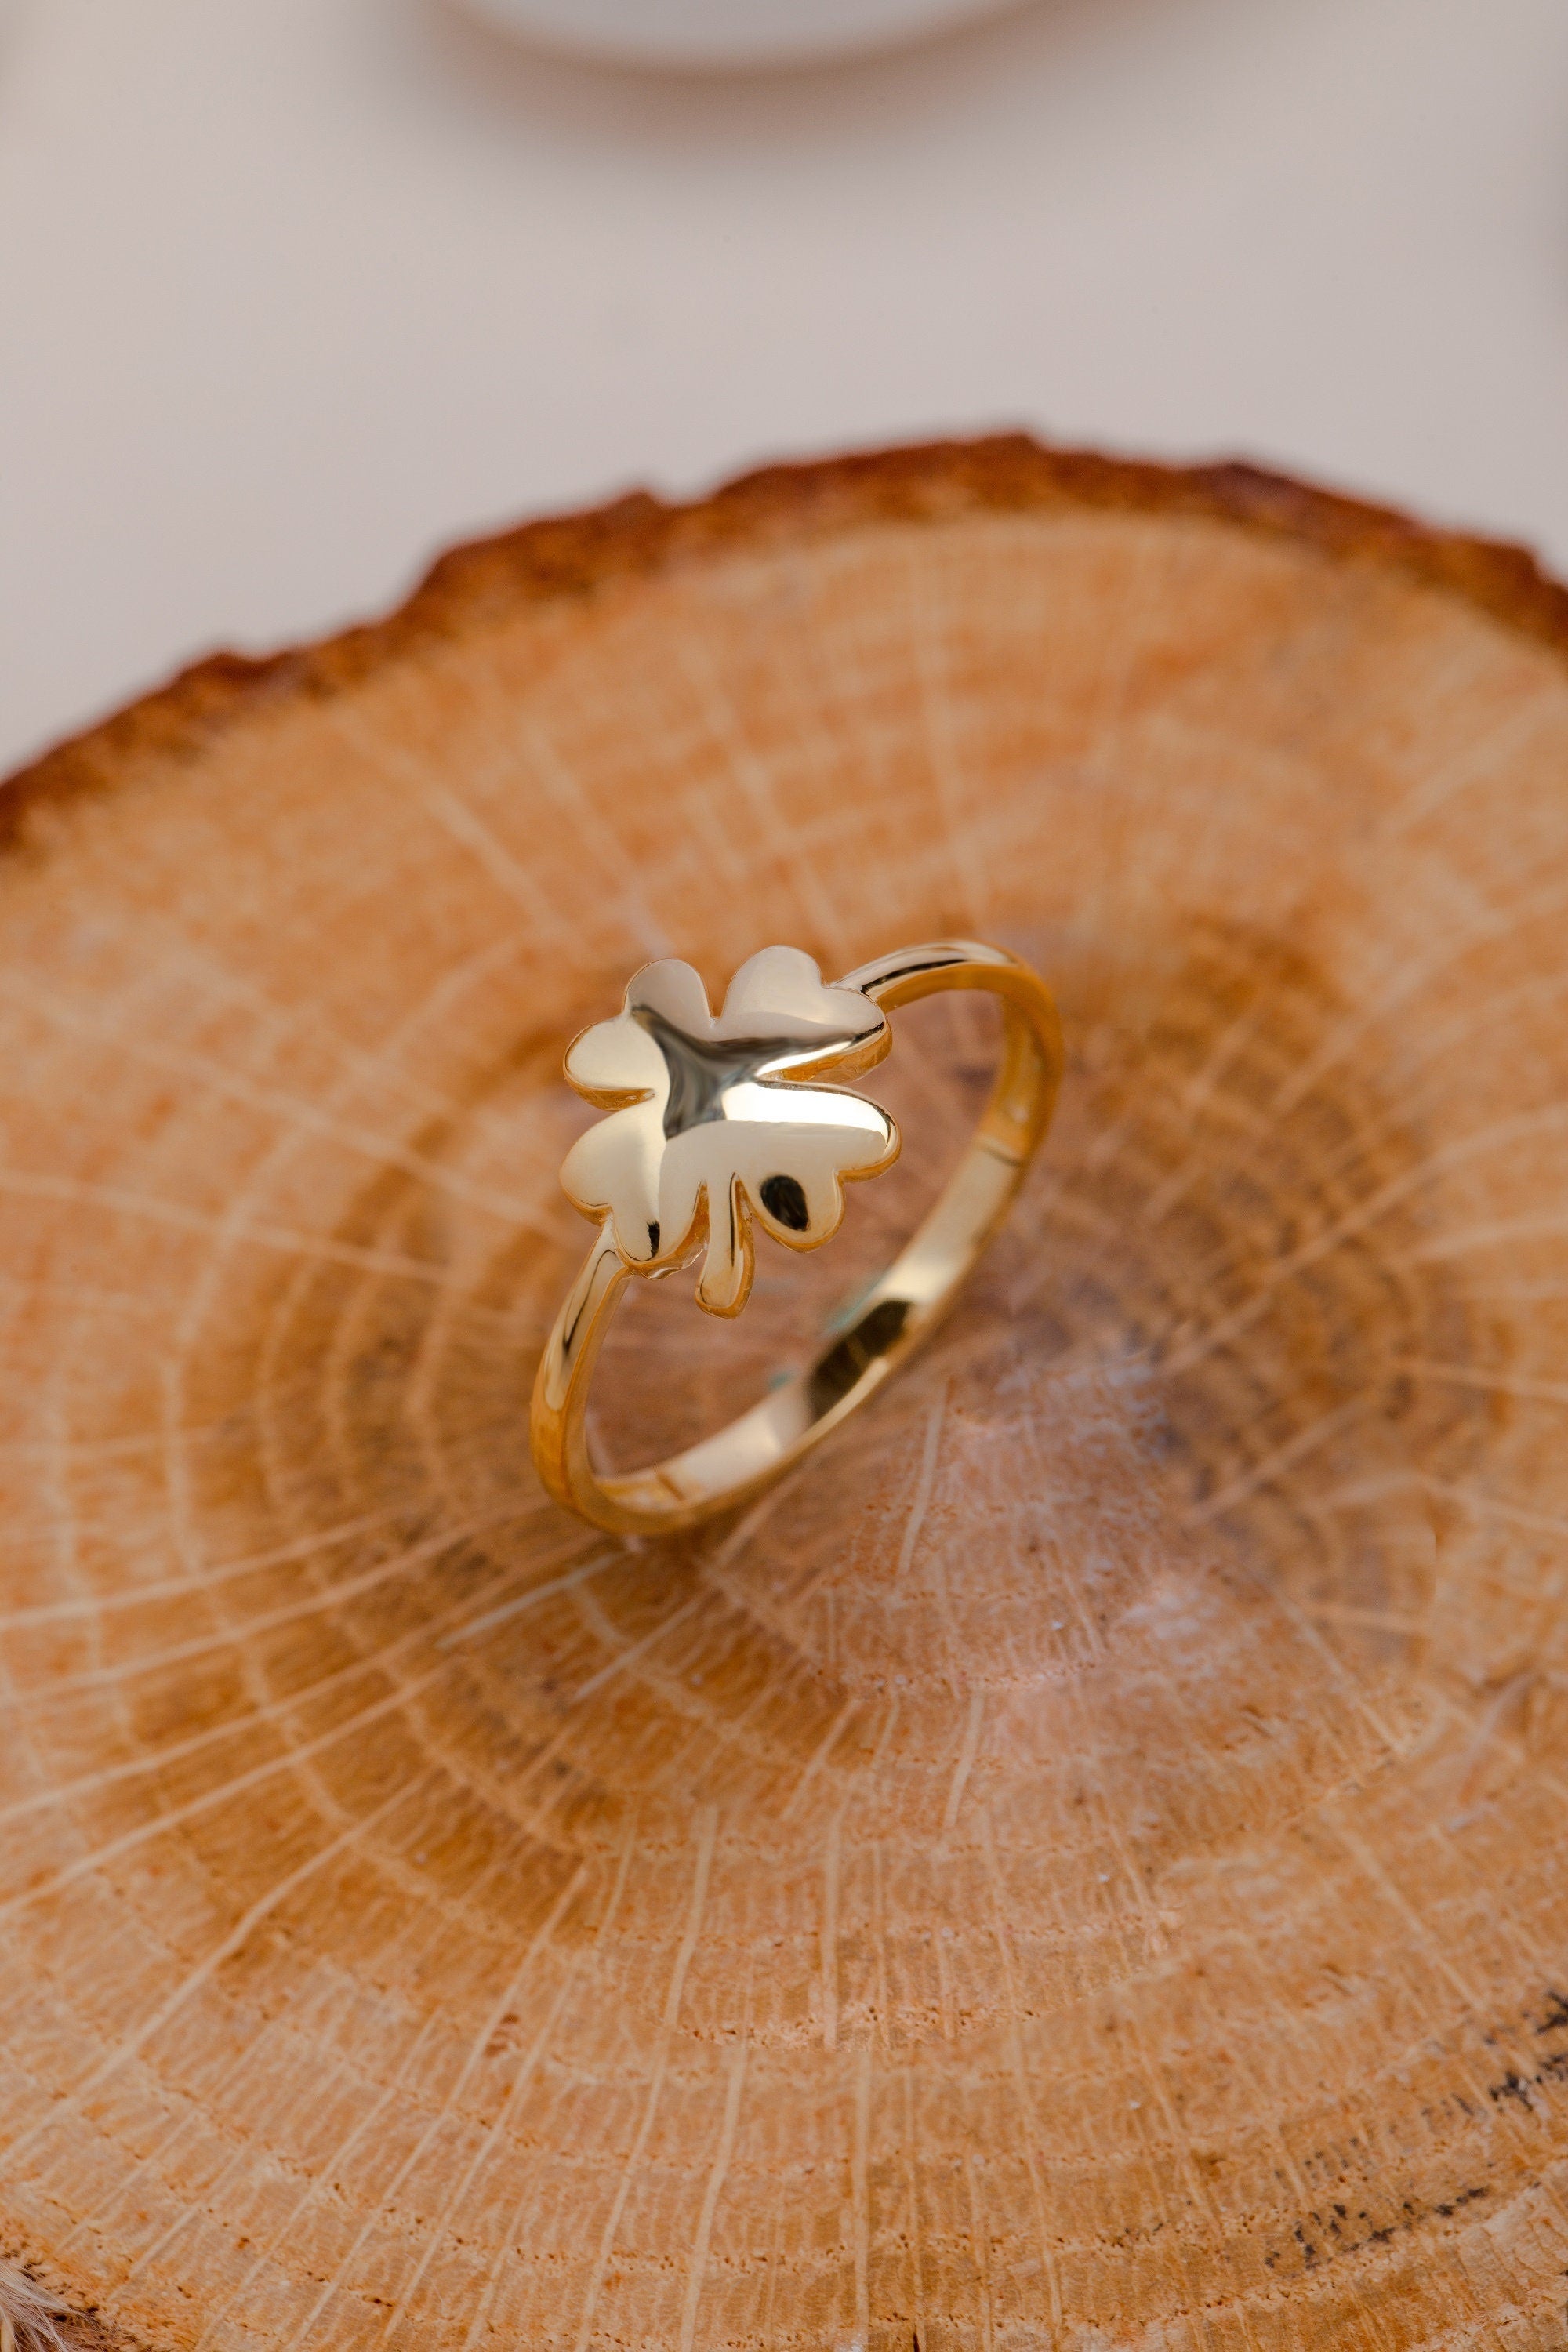 14K Solid Gold Clover Ring - Dainty Four Leaf Clover Ring - Gift for her - Clover Ring - Gift For Mother Day - Mother Day Jewelry